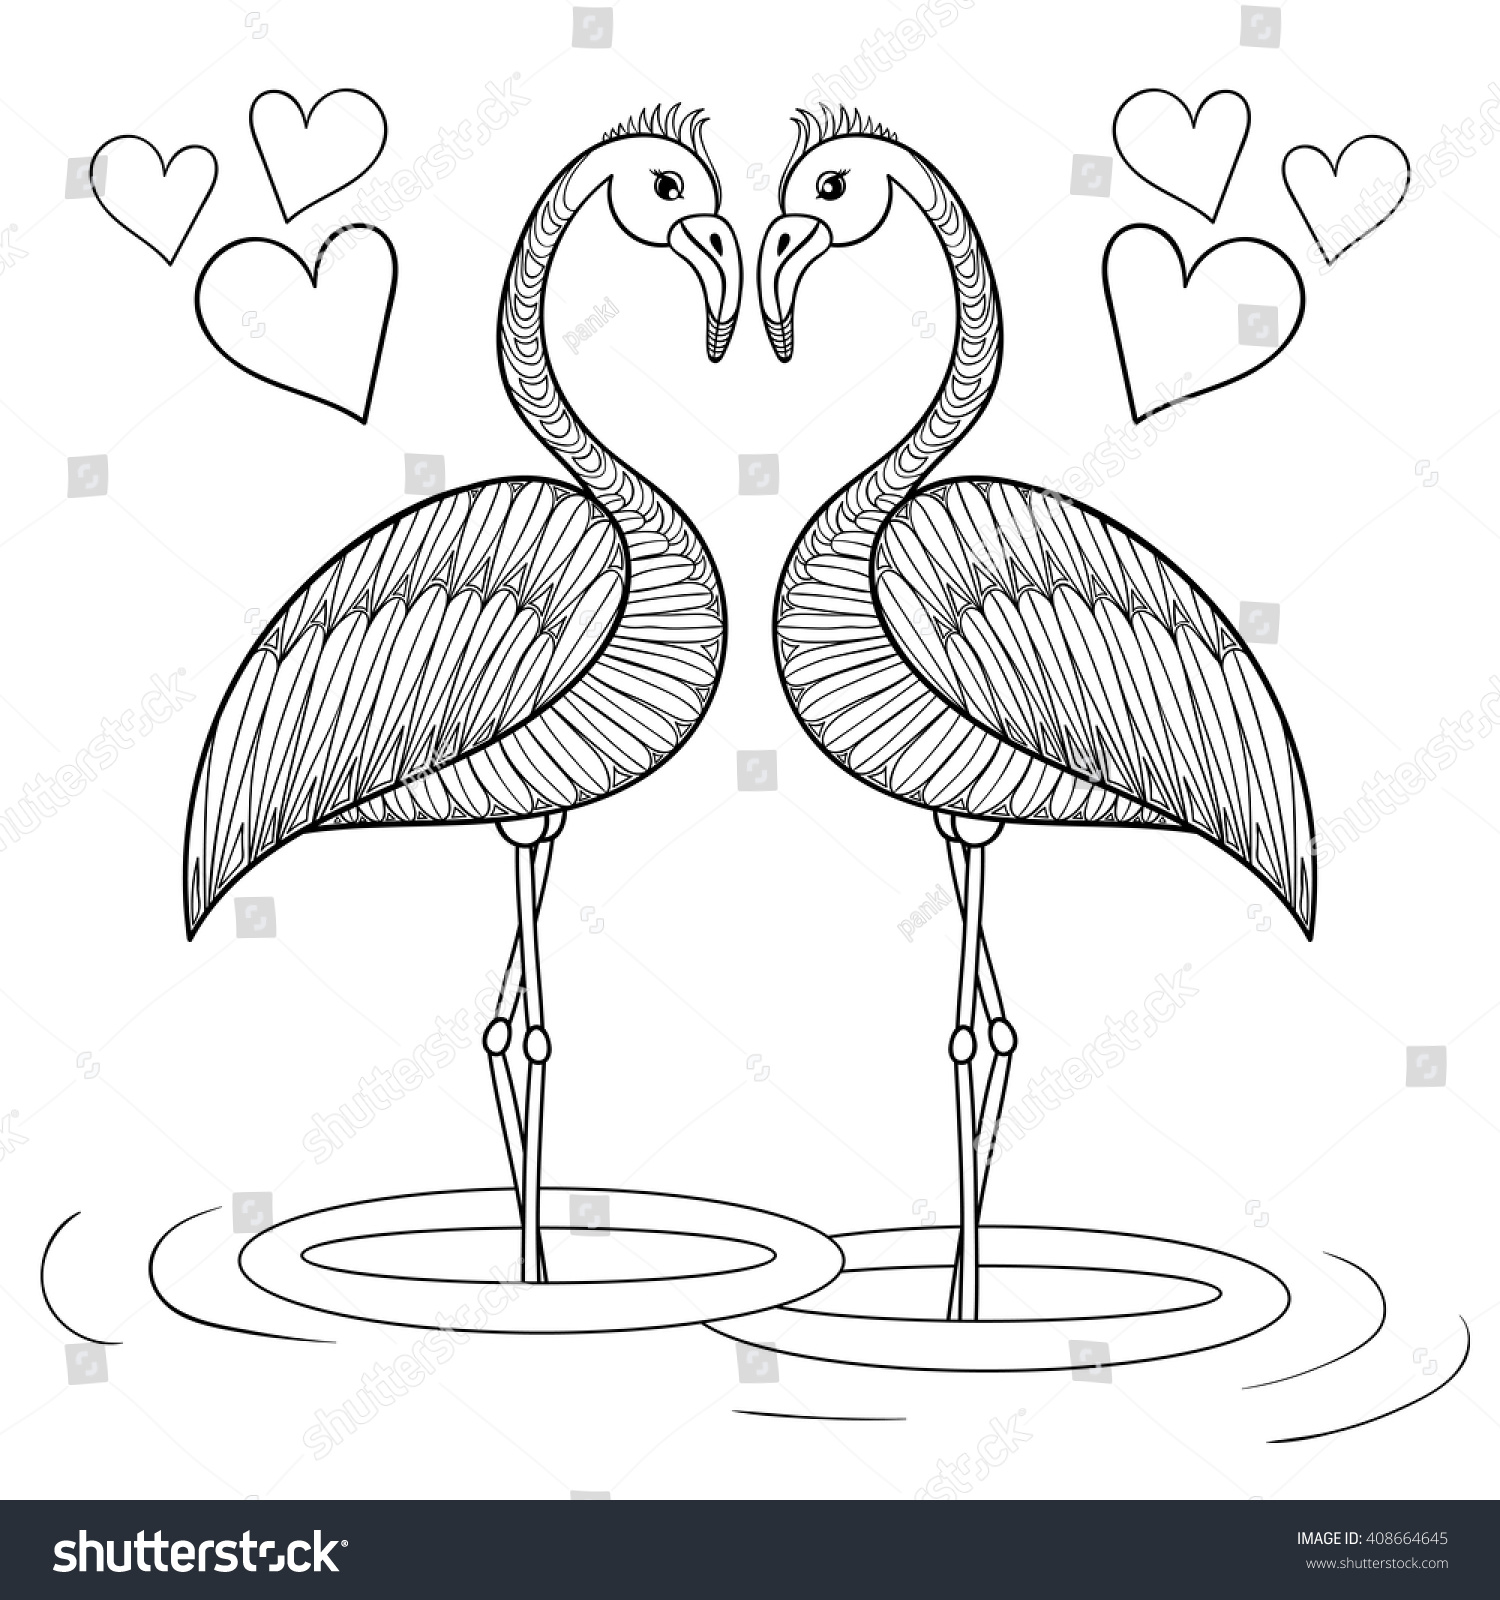 Coloring page with Flamingo birds in love zentangle hand drawing illustration tribal totem bird for